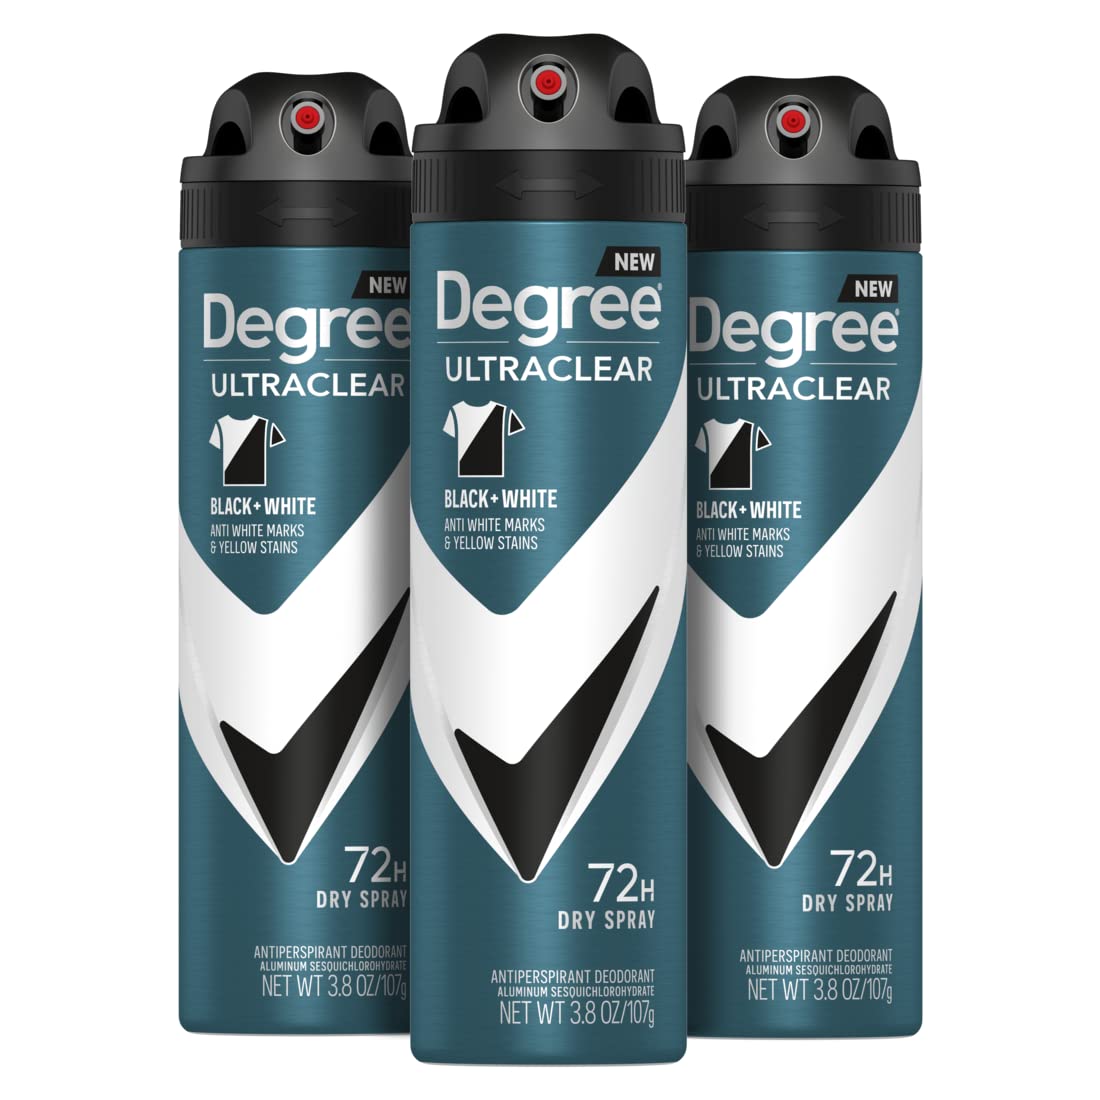 Degree Men Antiperspirant Deodorant Dry Spray Black + White Protects from Deodorant Stains Antiperspirant for Men with MotionSense Technology, 3.8 Ounce (Pack of 3)